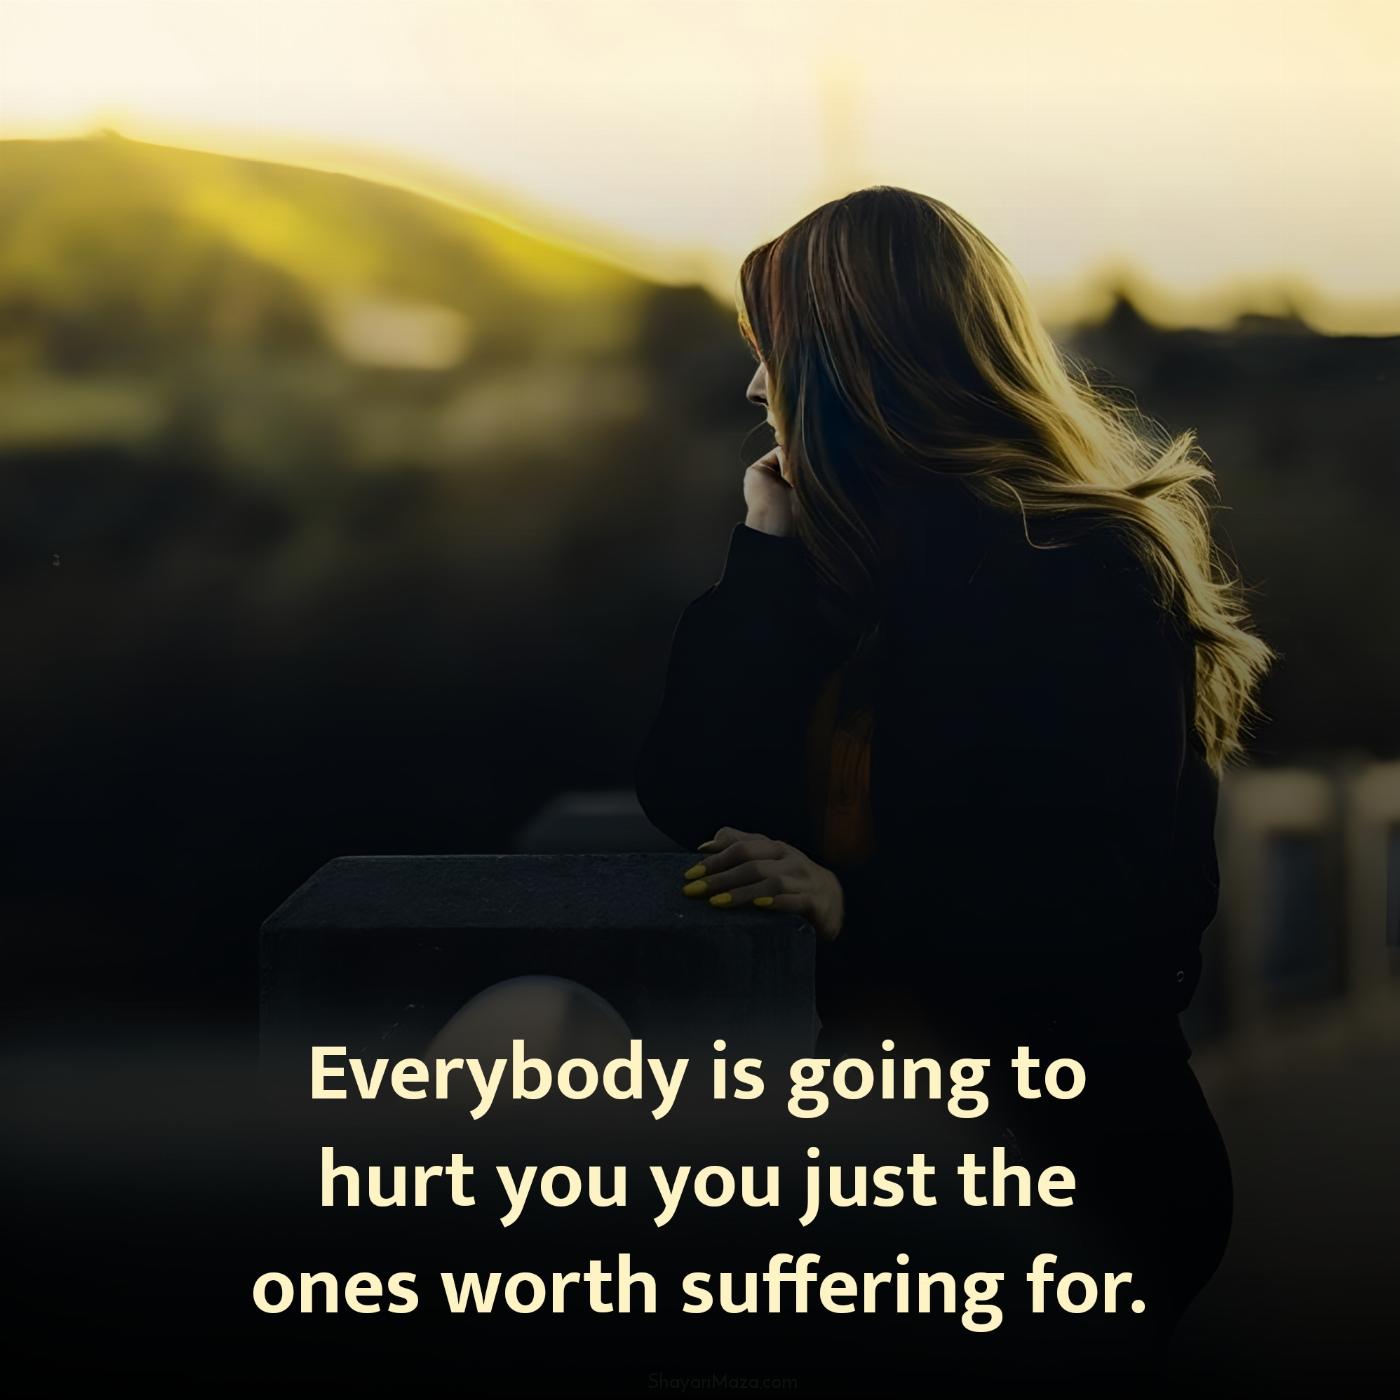 Everybody is going to hurt you you just the ones